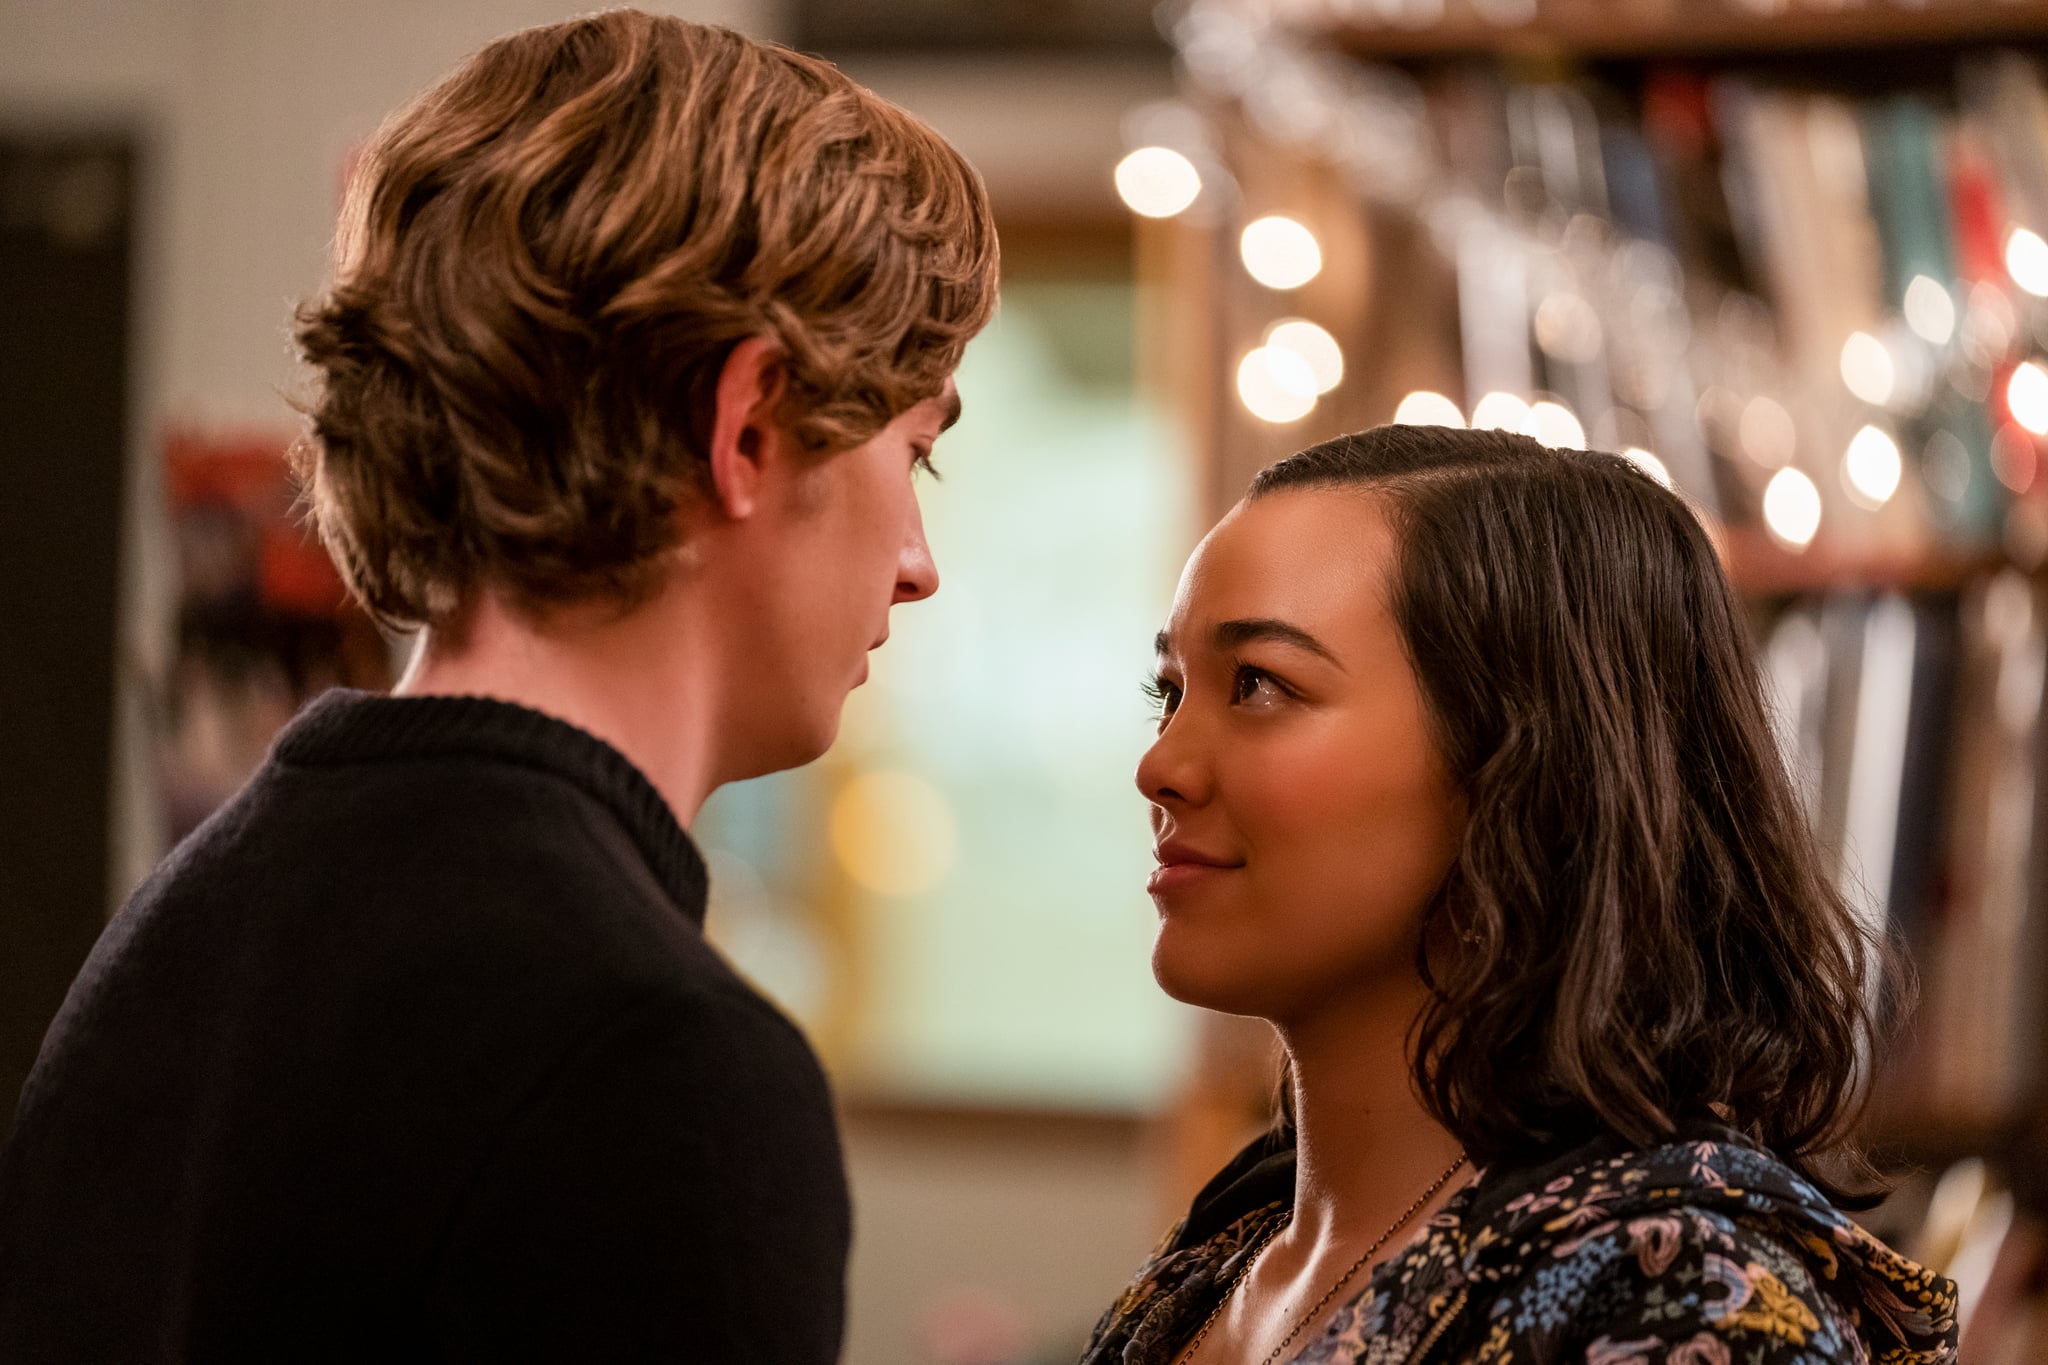 DASH AND LILY (L to R) AUSTIN ABRAMS as DASH and MIDORI FRANCIS as LILY in episode 108 of DASH AND LILY Cr. ALISON COHEN ROSA/NETFLIX  2020